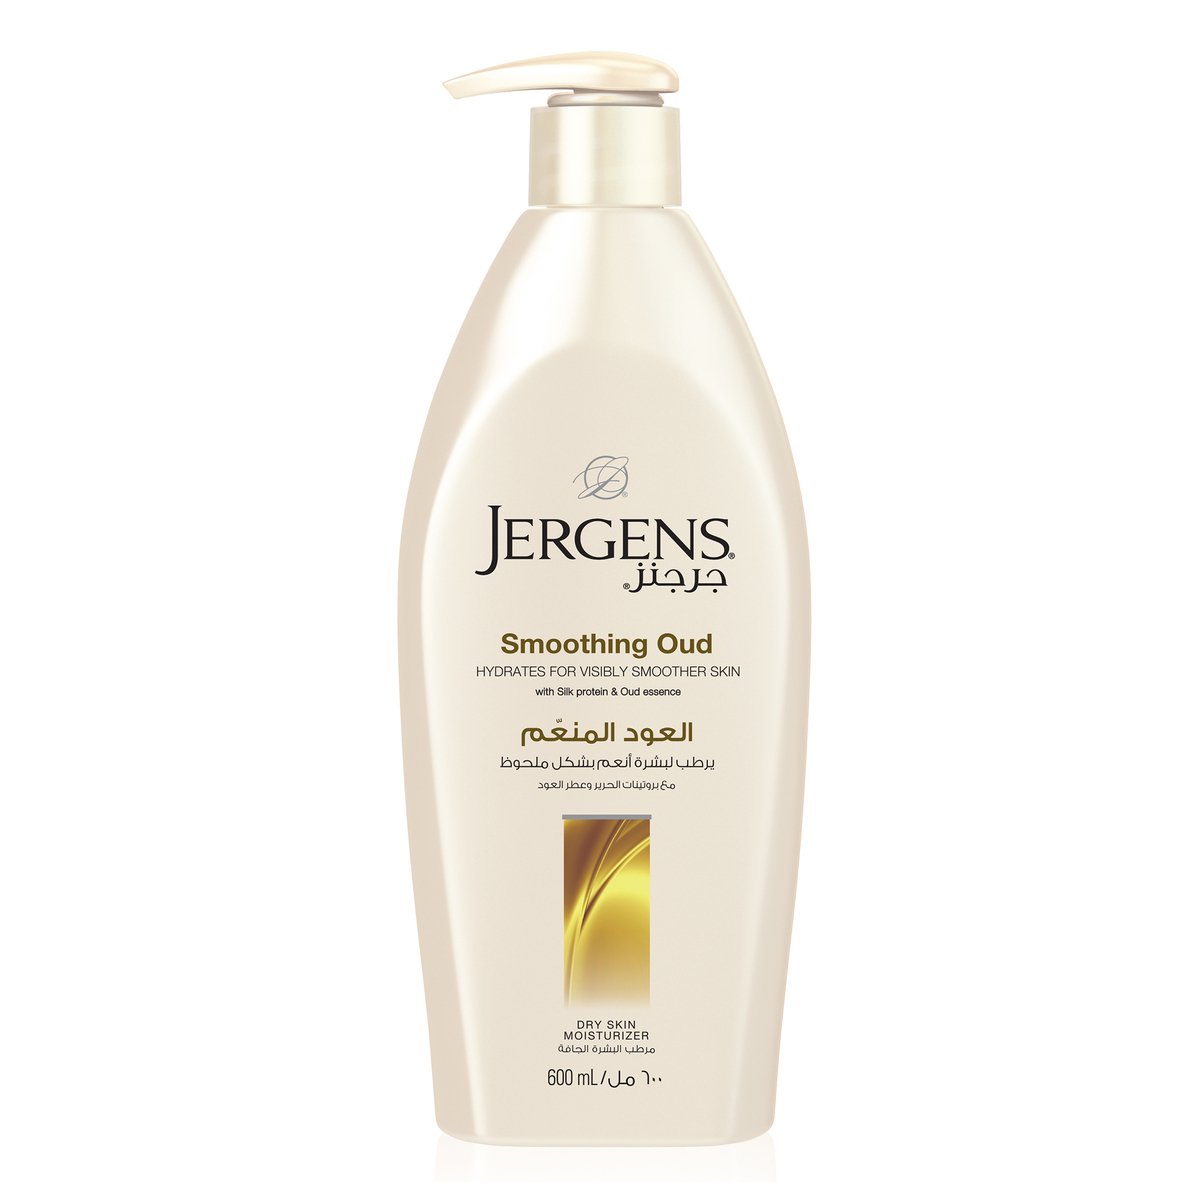 Jergens Body Lotion Smoothing Oud 600 ml